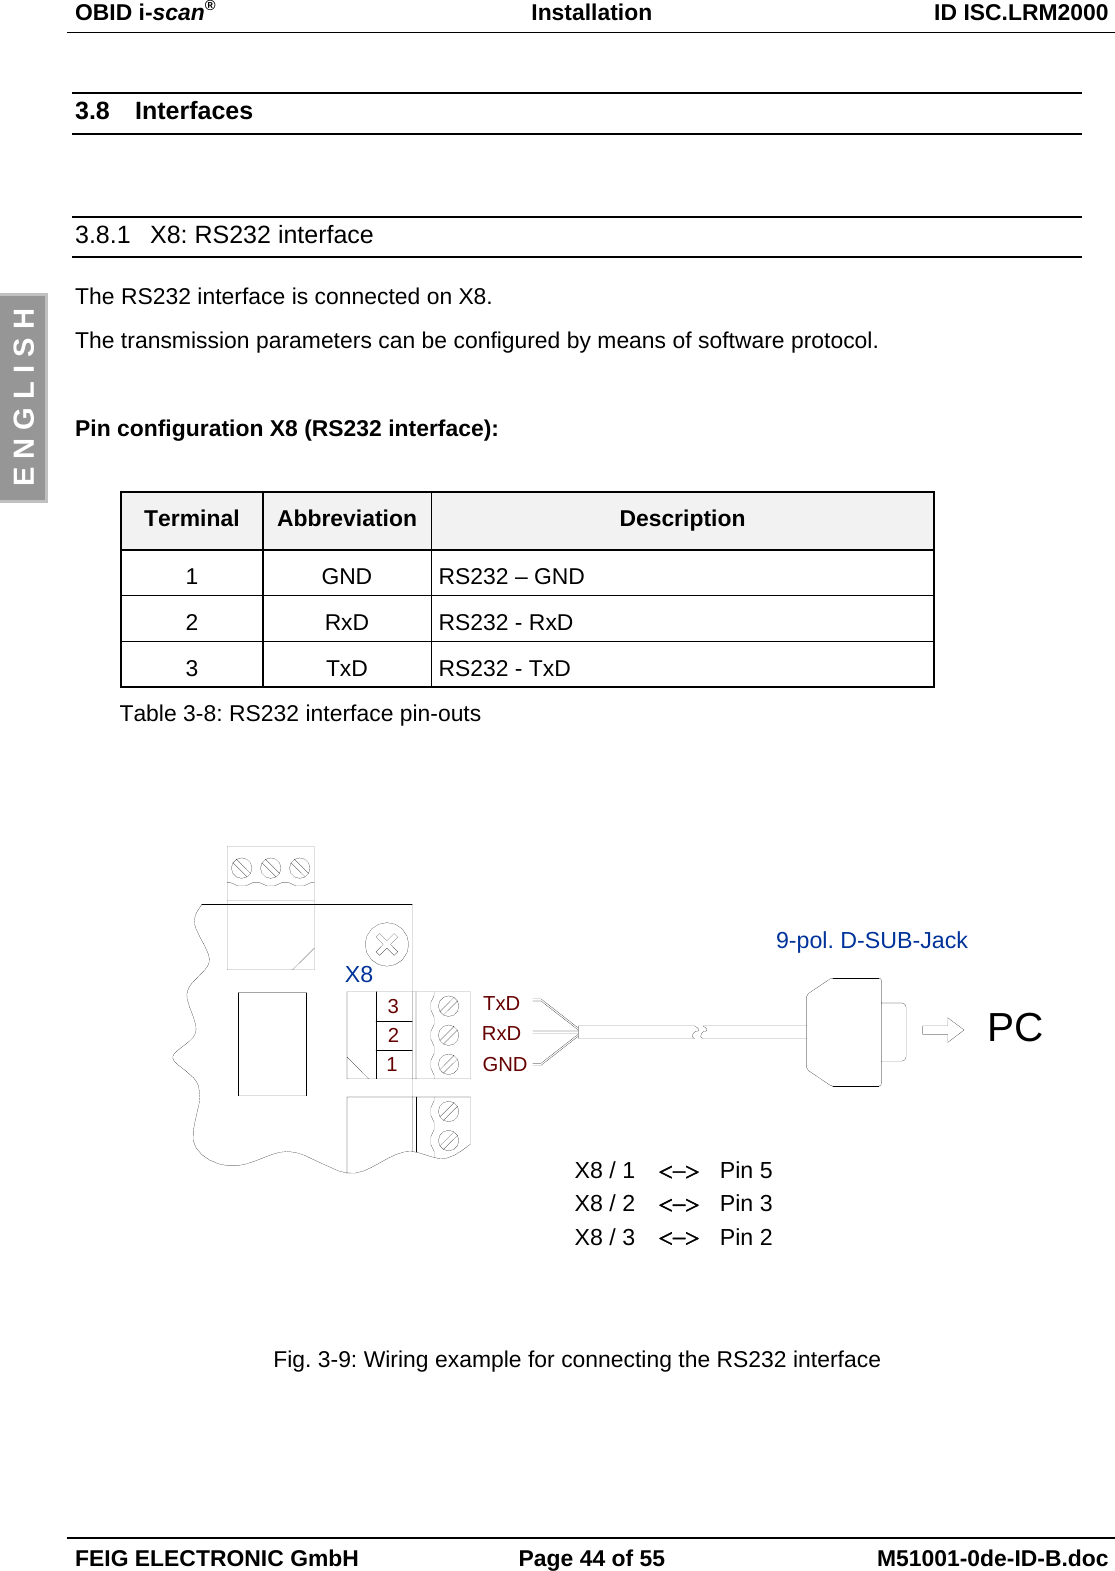 OBID i-scan®Installation ID ISC.LRM2000FEIG ELECTRONIC GmbH Page 44 of 55 M51001-0de-ID-B.docE N G L I S H3.8  Interfaces3.8.1  X8: RS232 interfaceThe RS232 interface is connected on X8.The transmission parameters can be configured by means of software protocol.Pin configuration X8 (RS232 interface):Terminal Abbreviation Description1GND RS232 – GND 2RxD RS232 - RxD 3TxD RS232 - TxD Table 3-8: RS232 interface pin-outsFig. 3-9: Wiring example for connecting the RS232 interfaceX8 / 3X8 / 2X8 / 1Pin 2&lt;−&gt;Pin 5Pin 3&lt;−&gt;&lt;−&gt;9-pol. D-SUB-Jack123X8TxDRxDGND PC